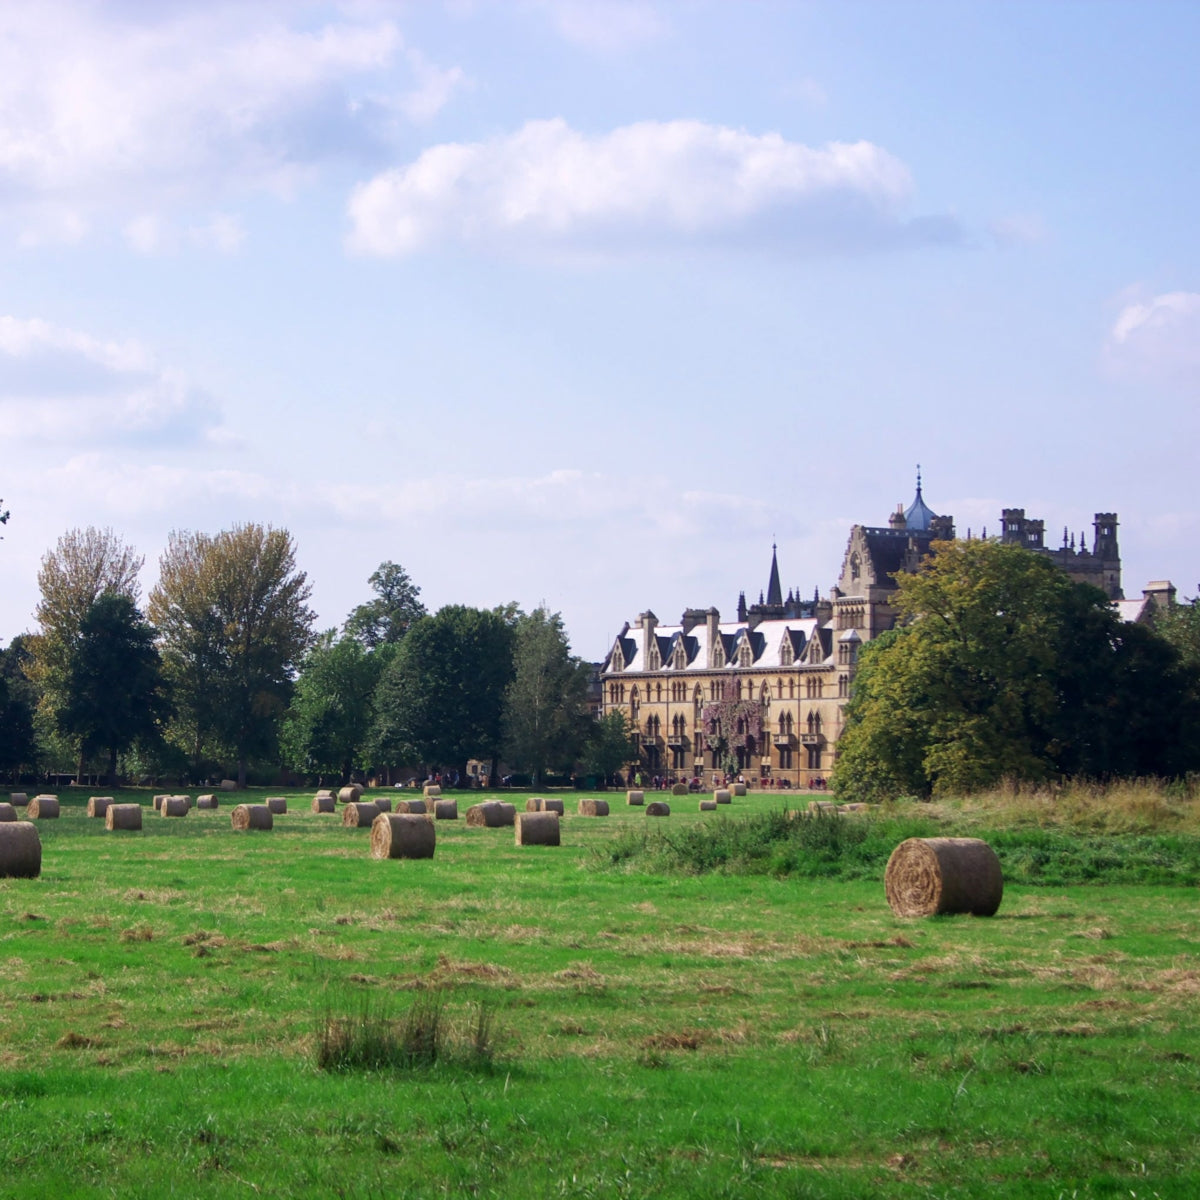 The view across Christchurch Meadow towards the college